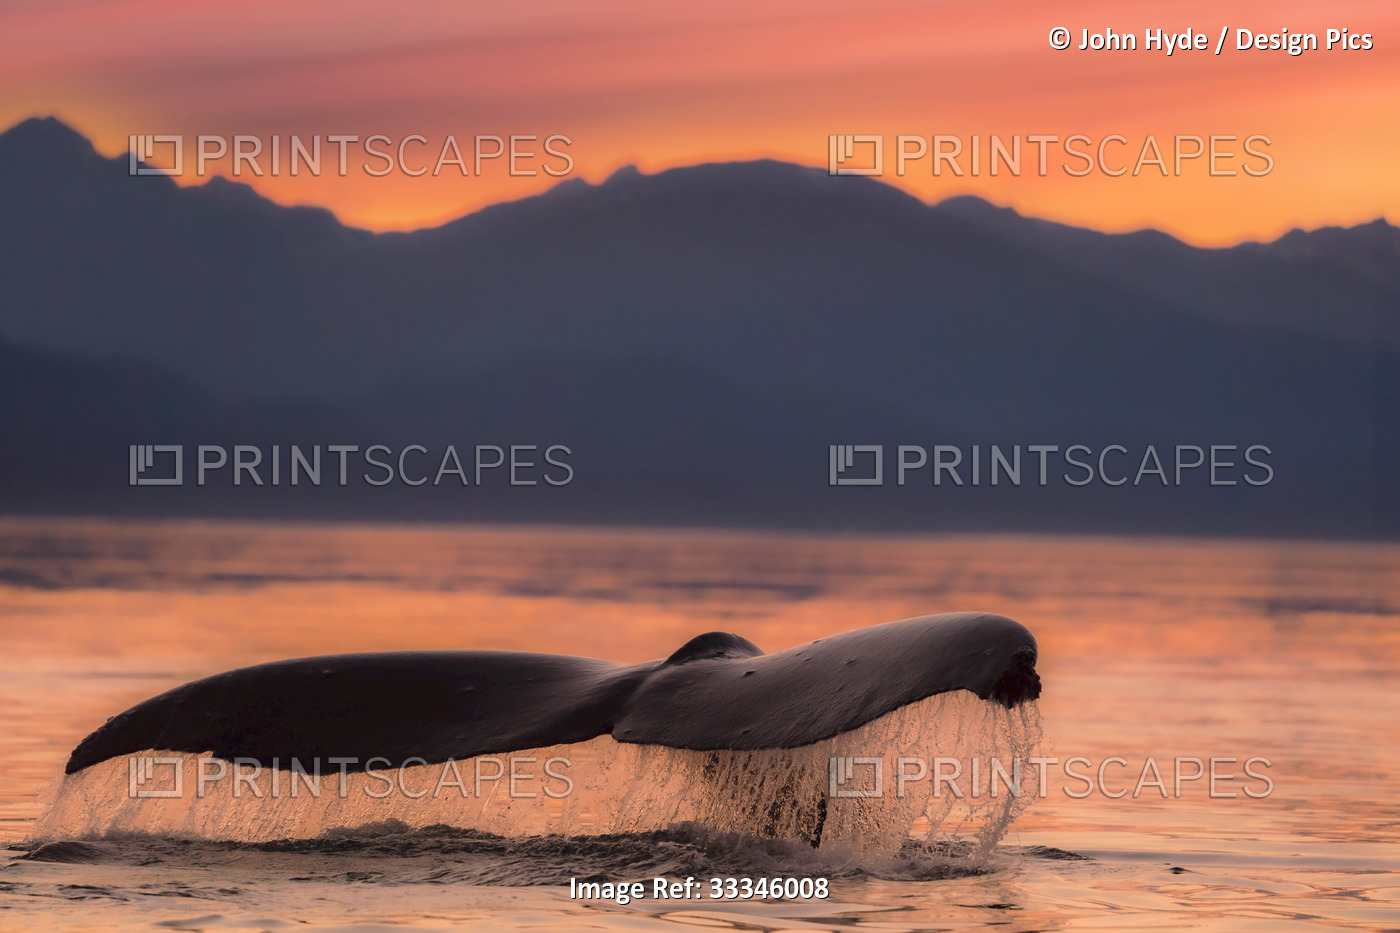 Humpback whale (Megaptera novaeangliae) fluke at the surface of water at dusk; ...